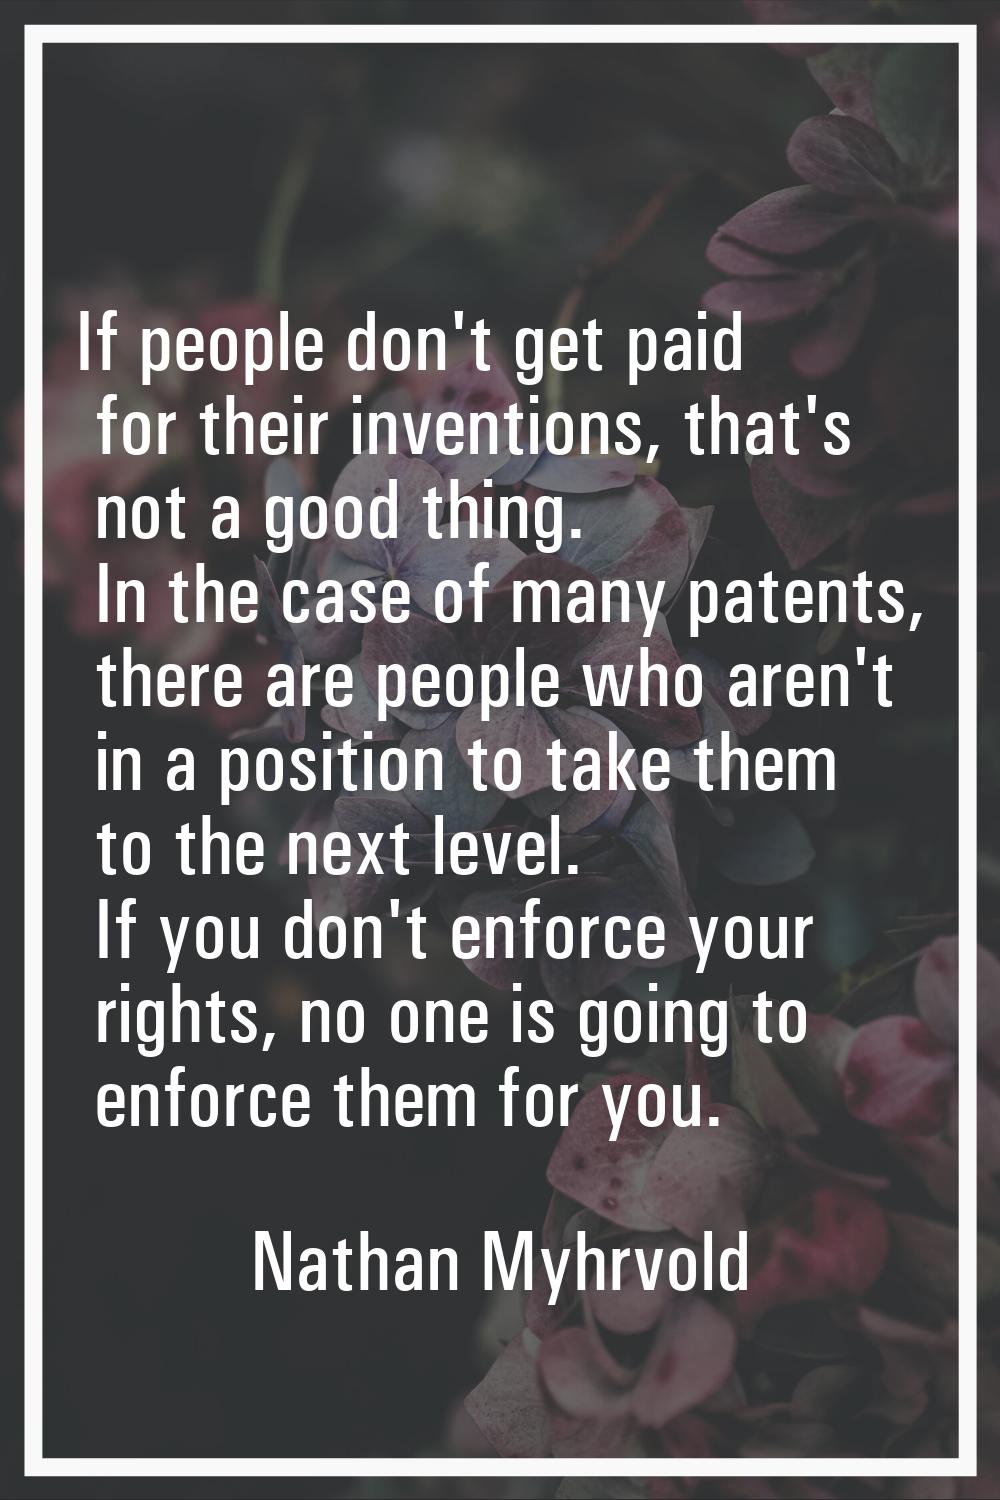 If people don't get paid for their inventions, that's not a good thing. In the case of many patents